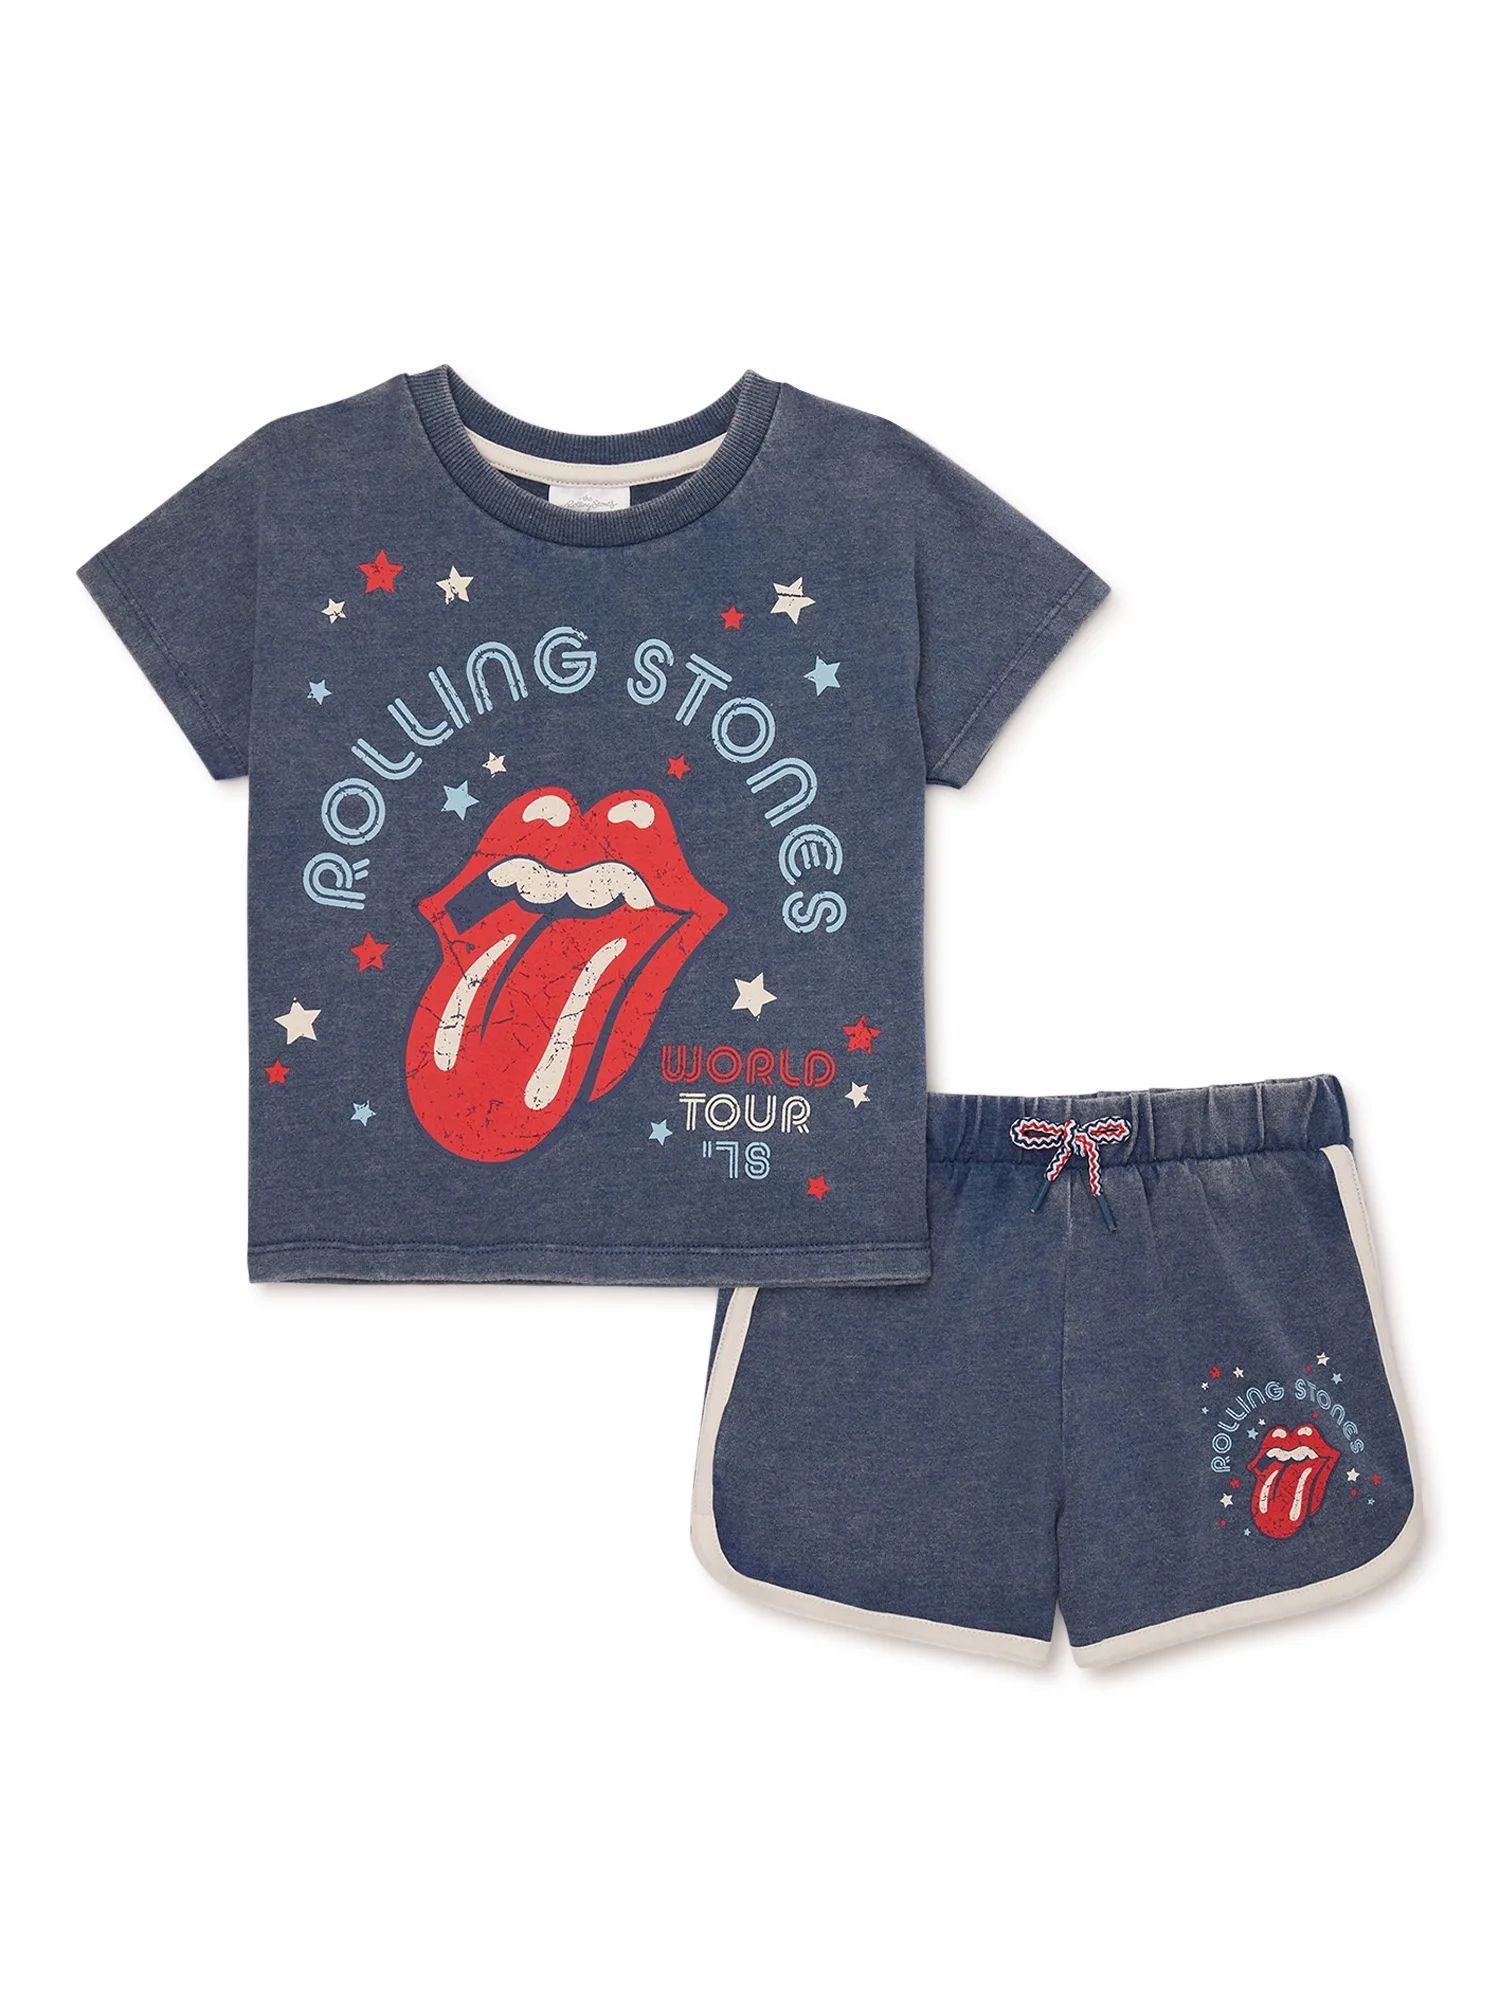 Rolling Stones Toddler Girls T-Shirt and Shorts Set, 2-Piece, Sizes 2T-5T | Walmart (US)